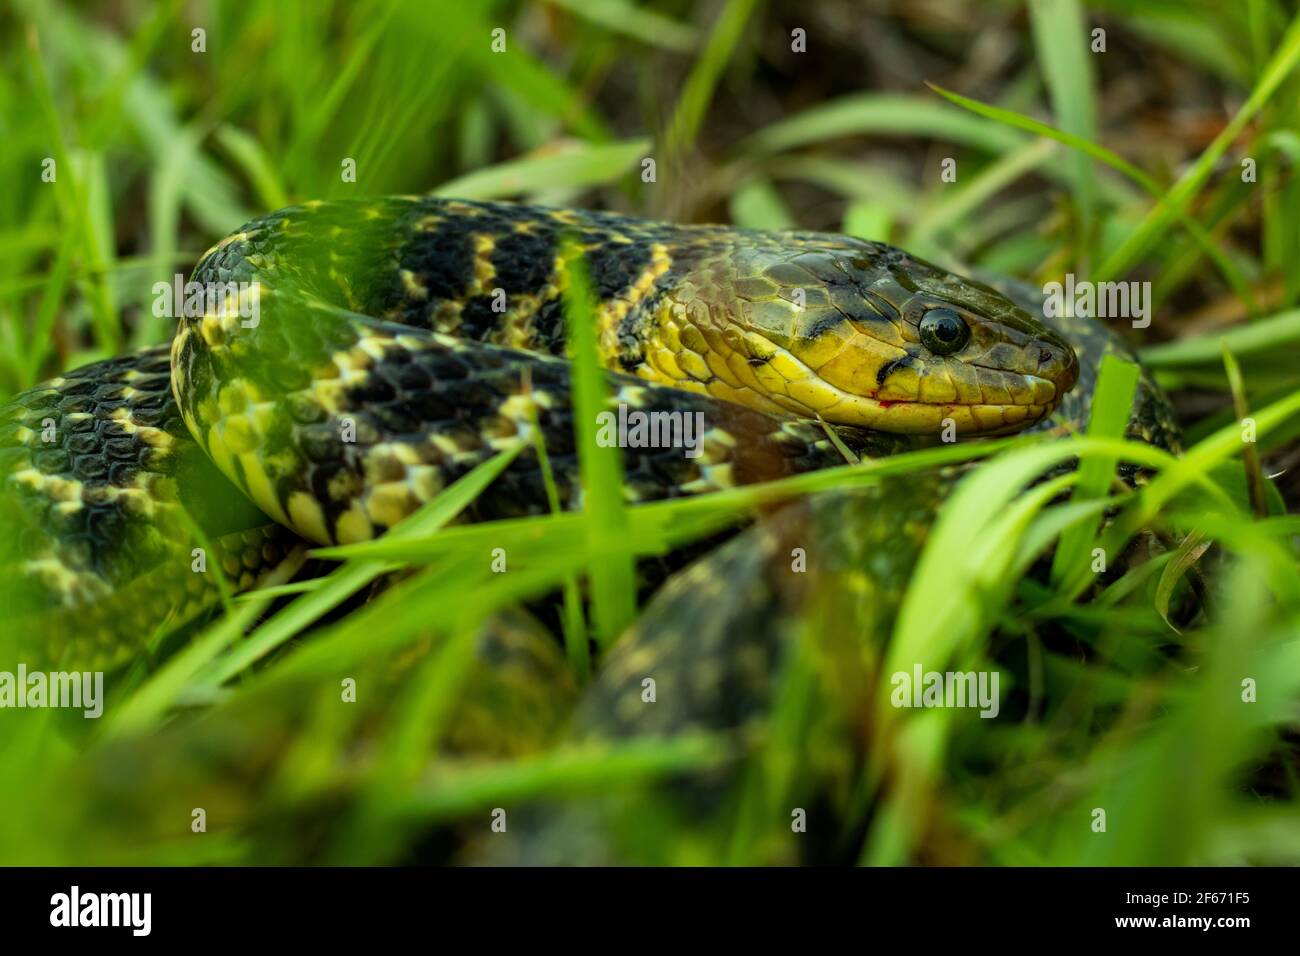 On a sunny day in green-yellow grass in the morning, Amphiesma stolatum snake hides and hunting for food long time Stock Photo